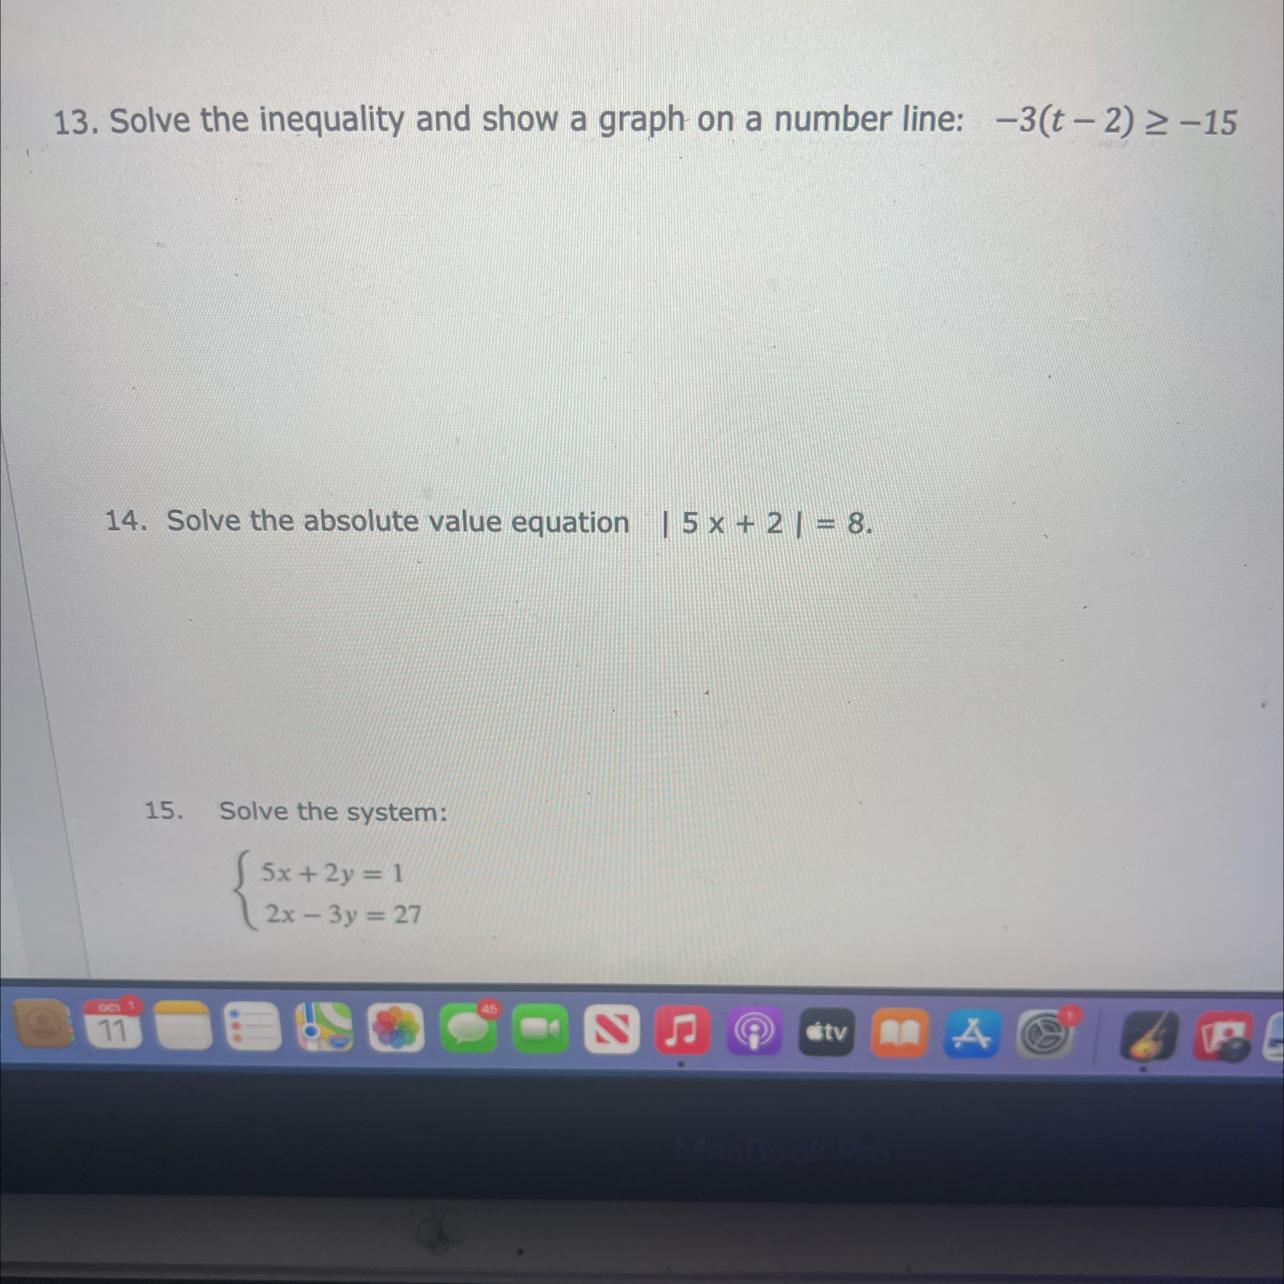 13. Solve The Inequality And Share A Graph On A Number Line